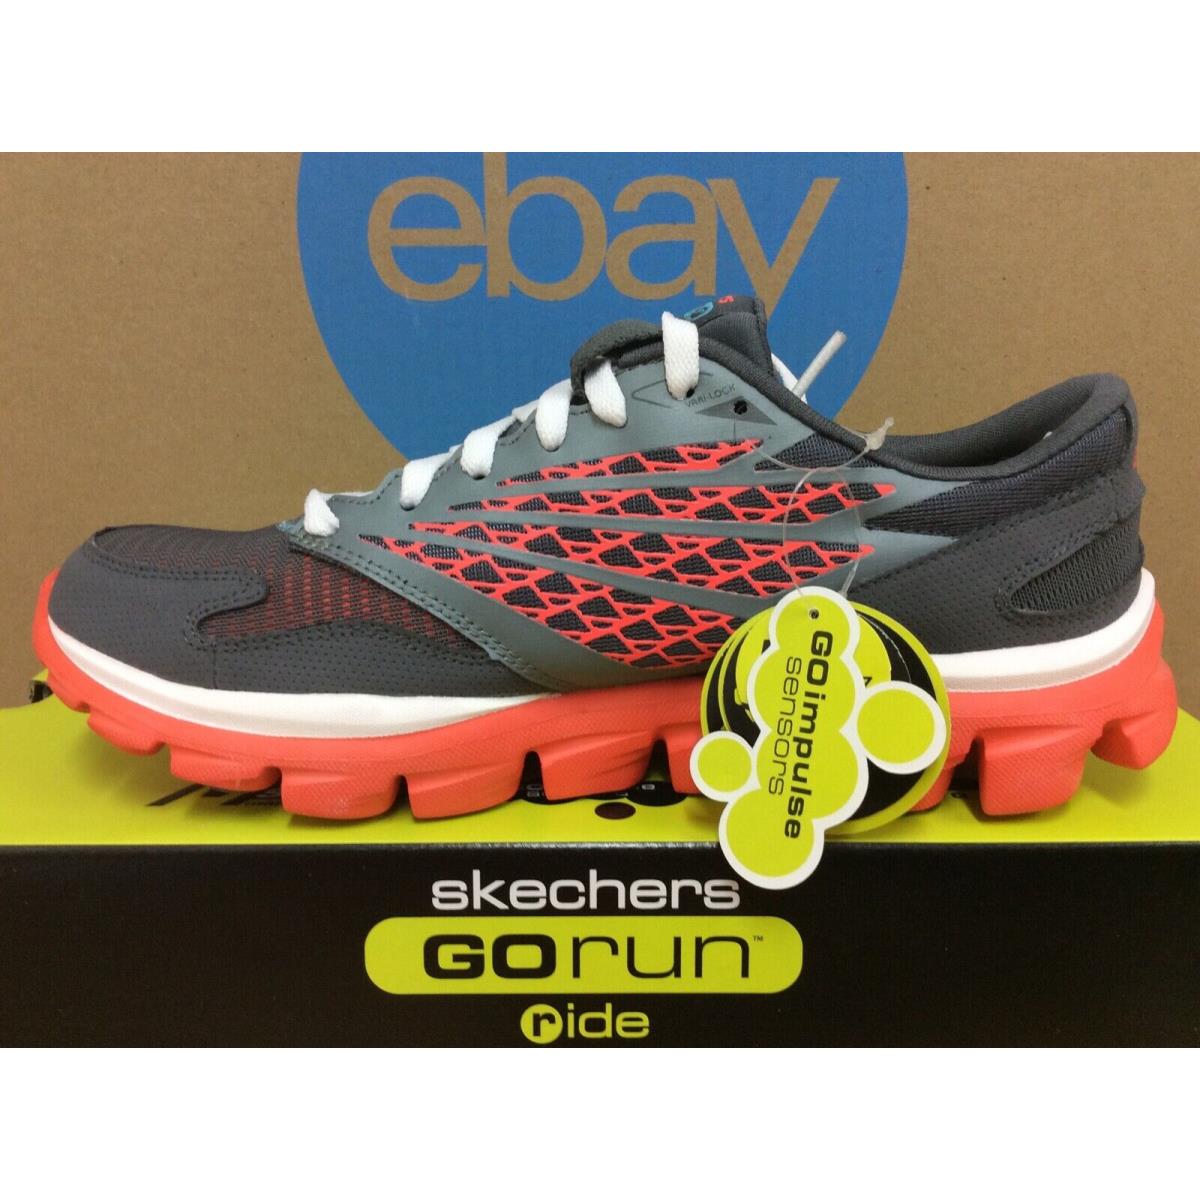 Skechers shoes Run Ride - Charcoal Coral 4